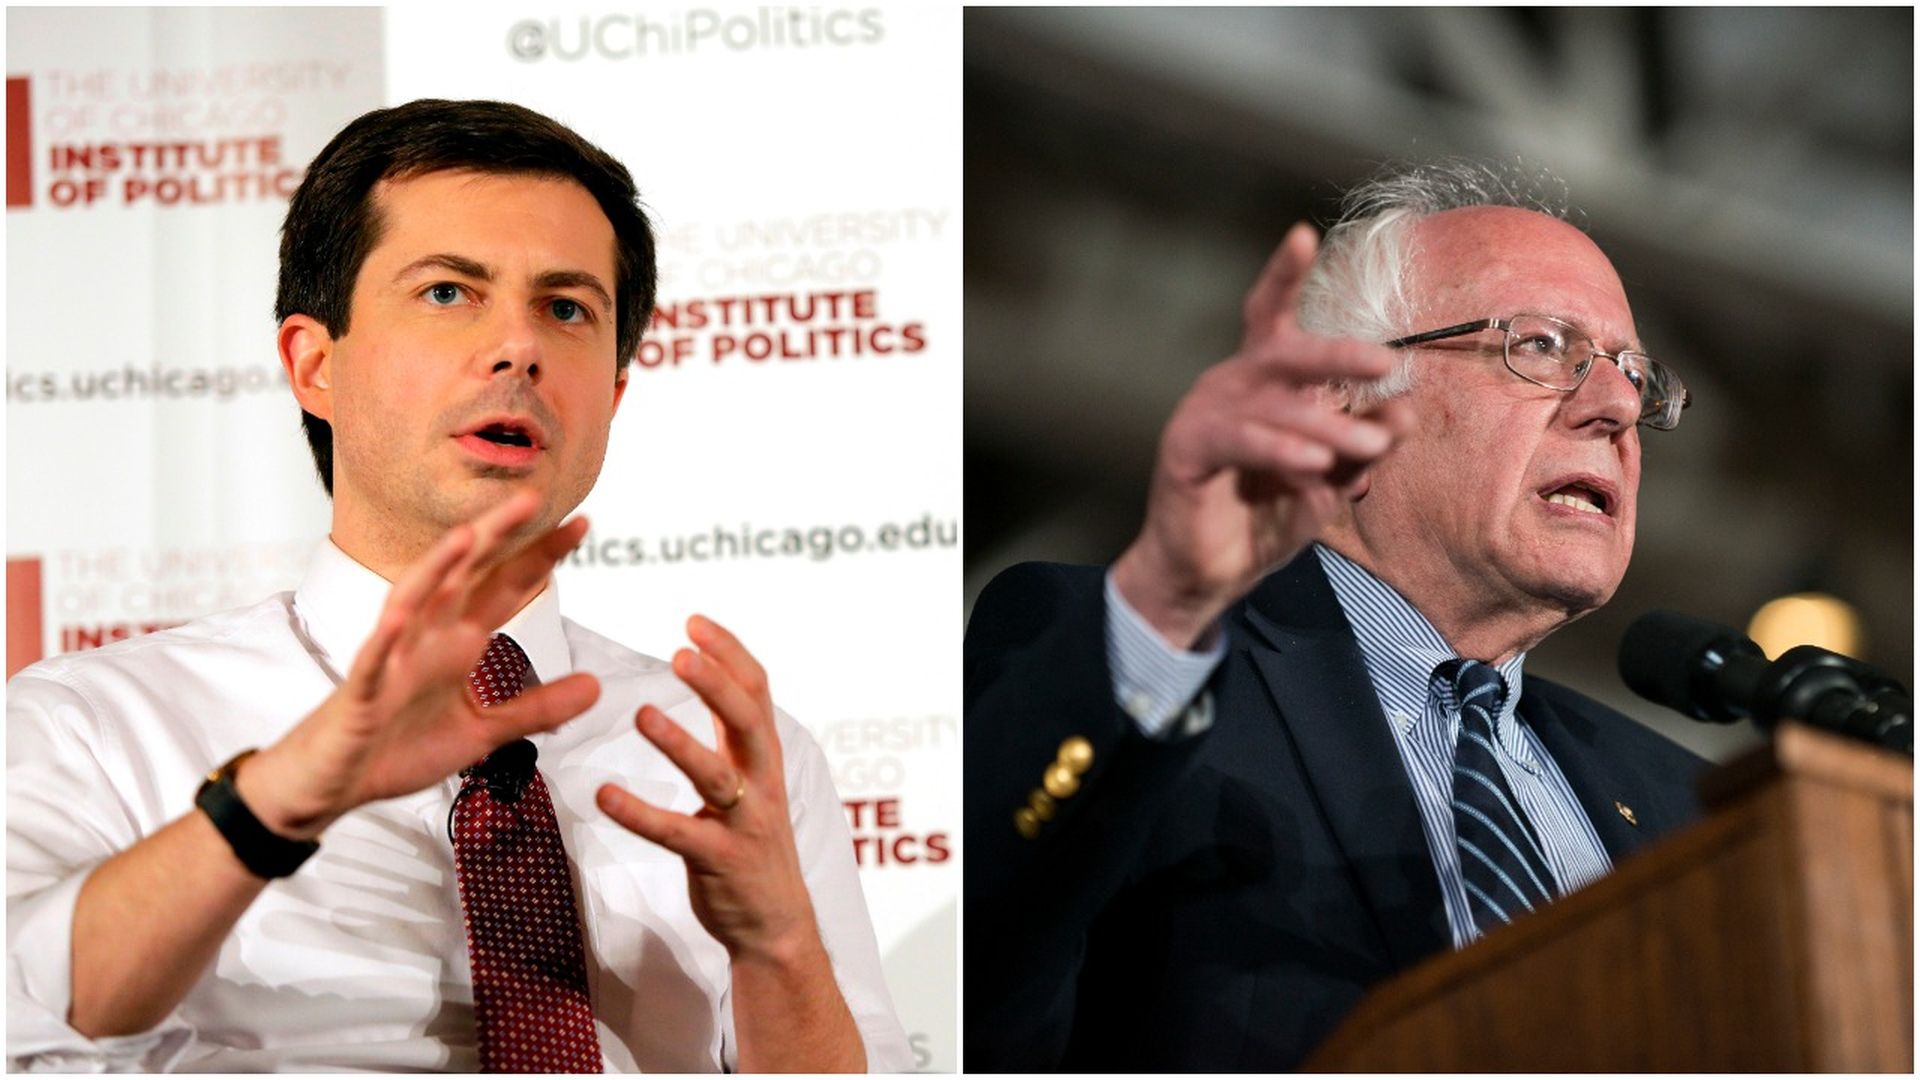 This image is a two-way split screen of Pete Buttigieg and Bernie Sanders